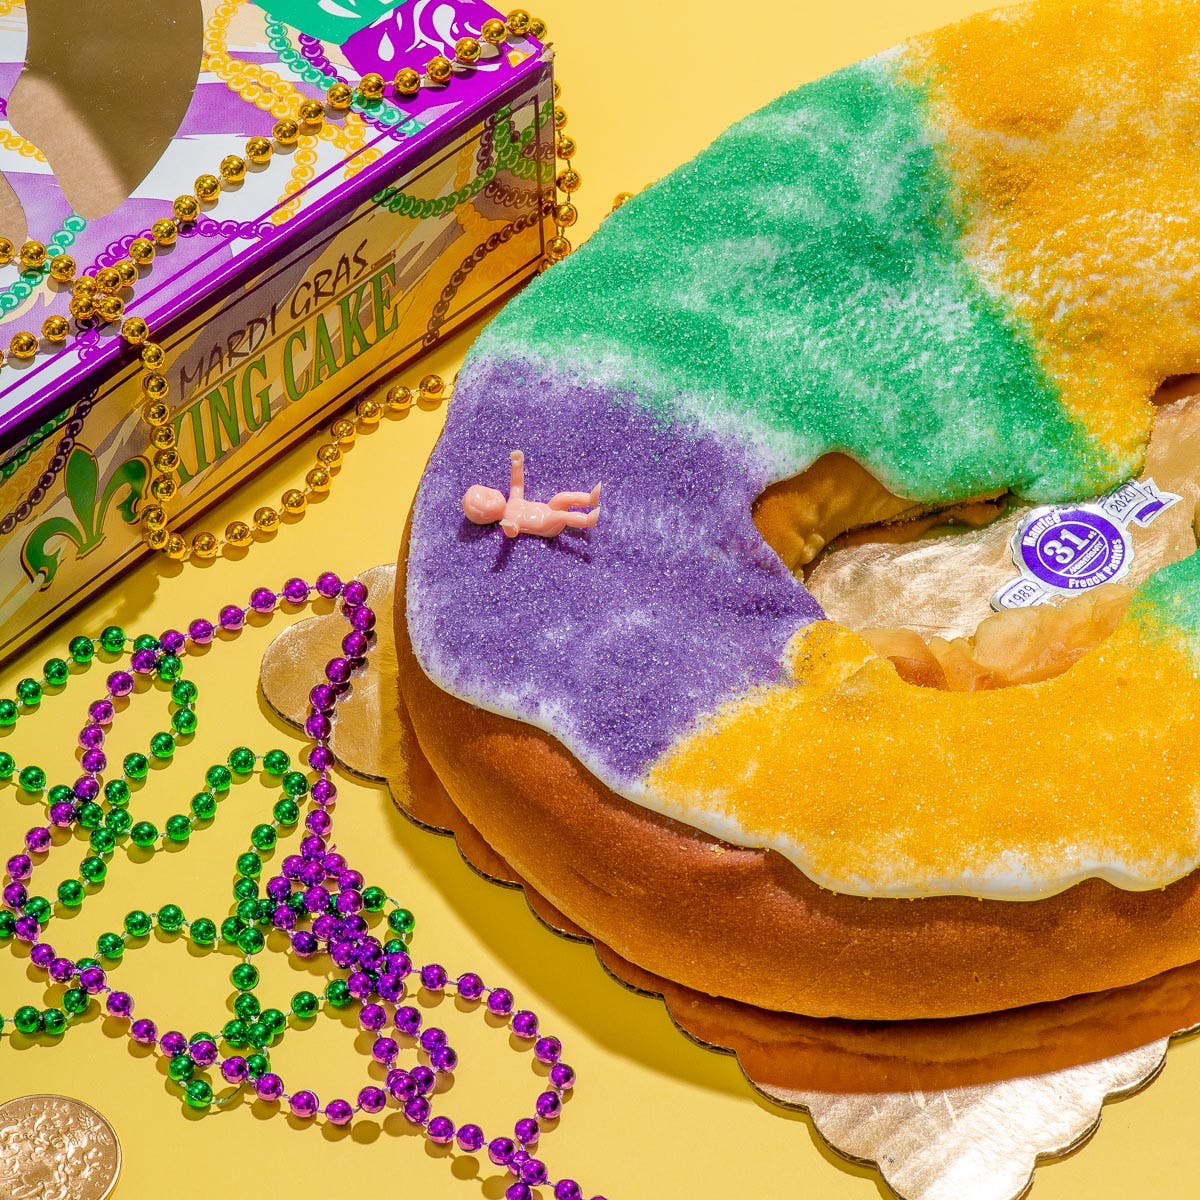 New Orleans King Cake with Filling by Maurice French Pastries